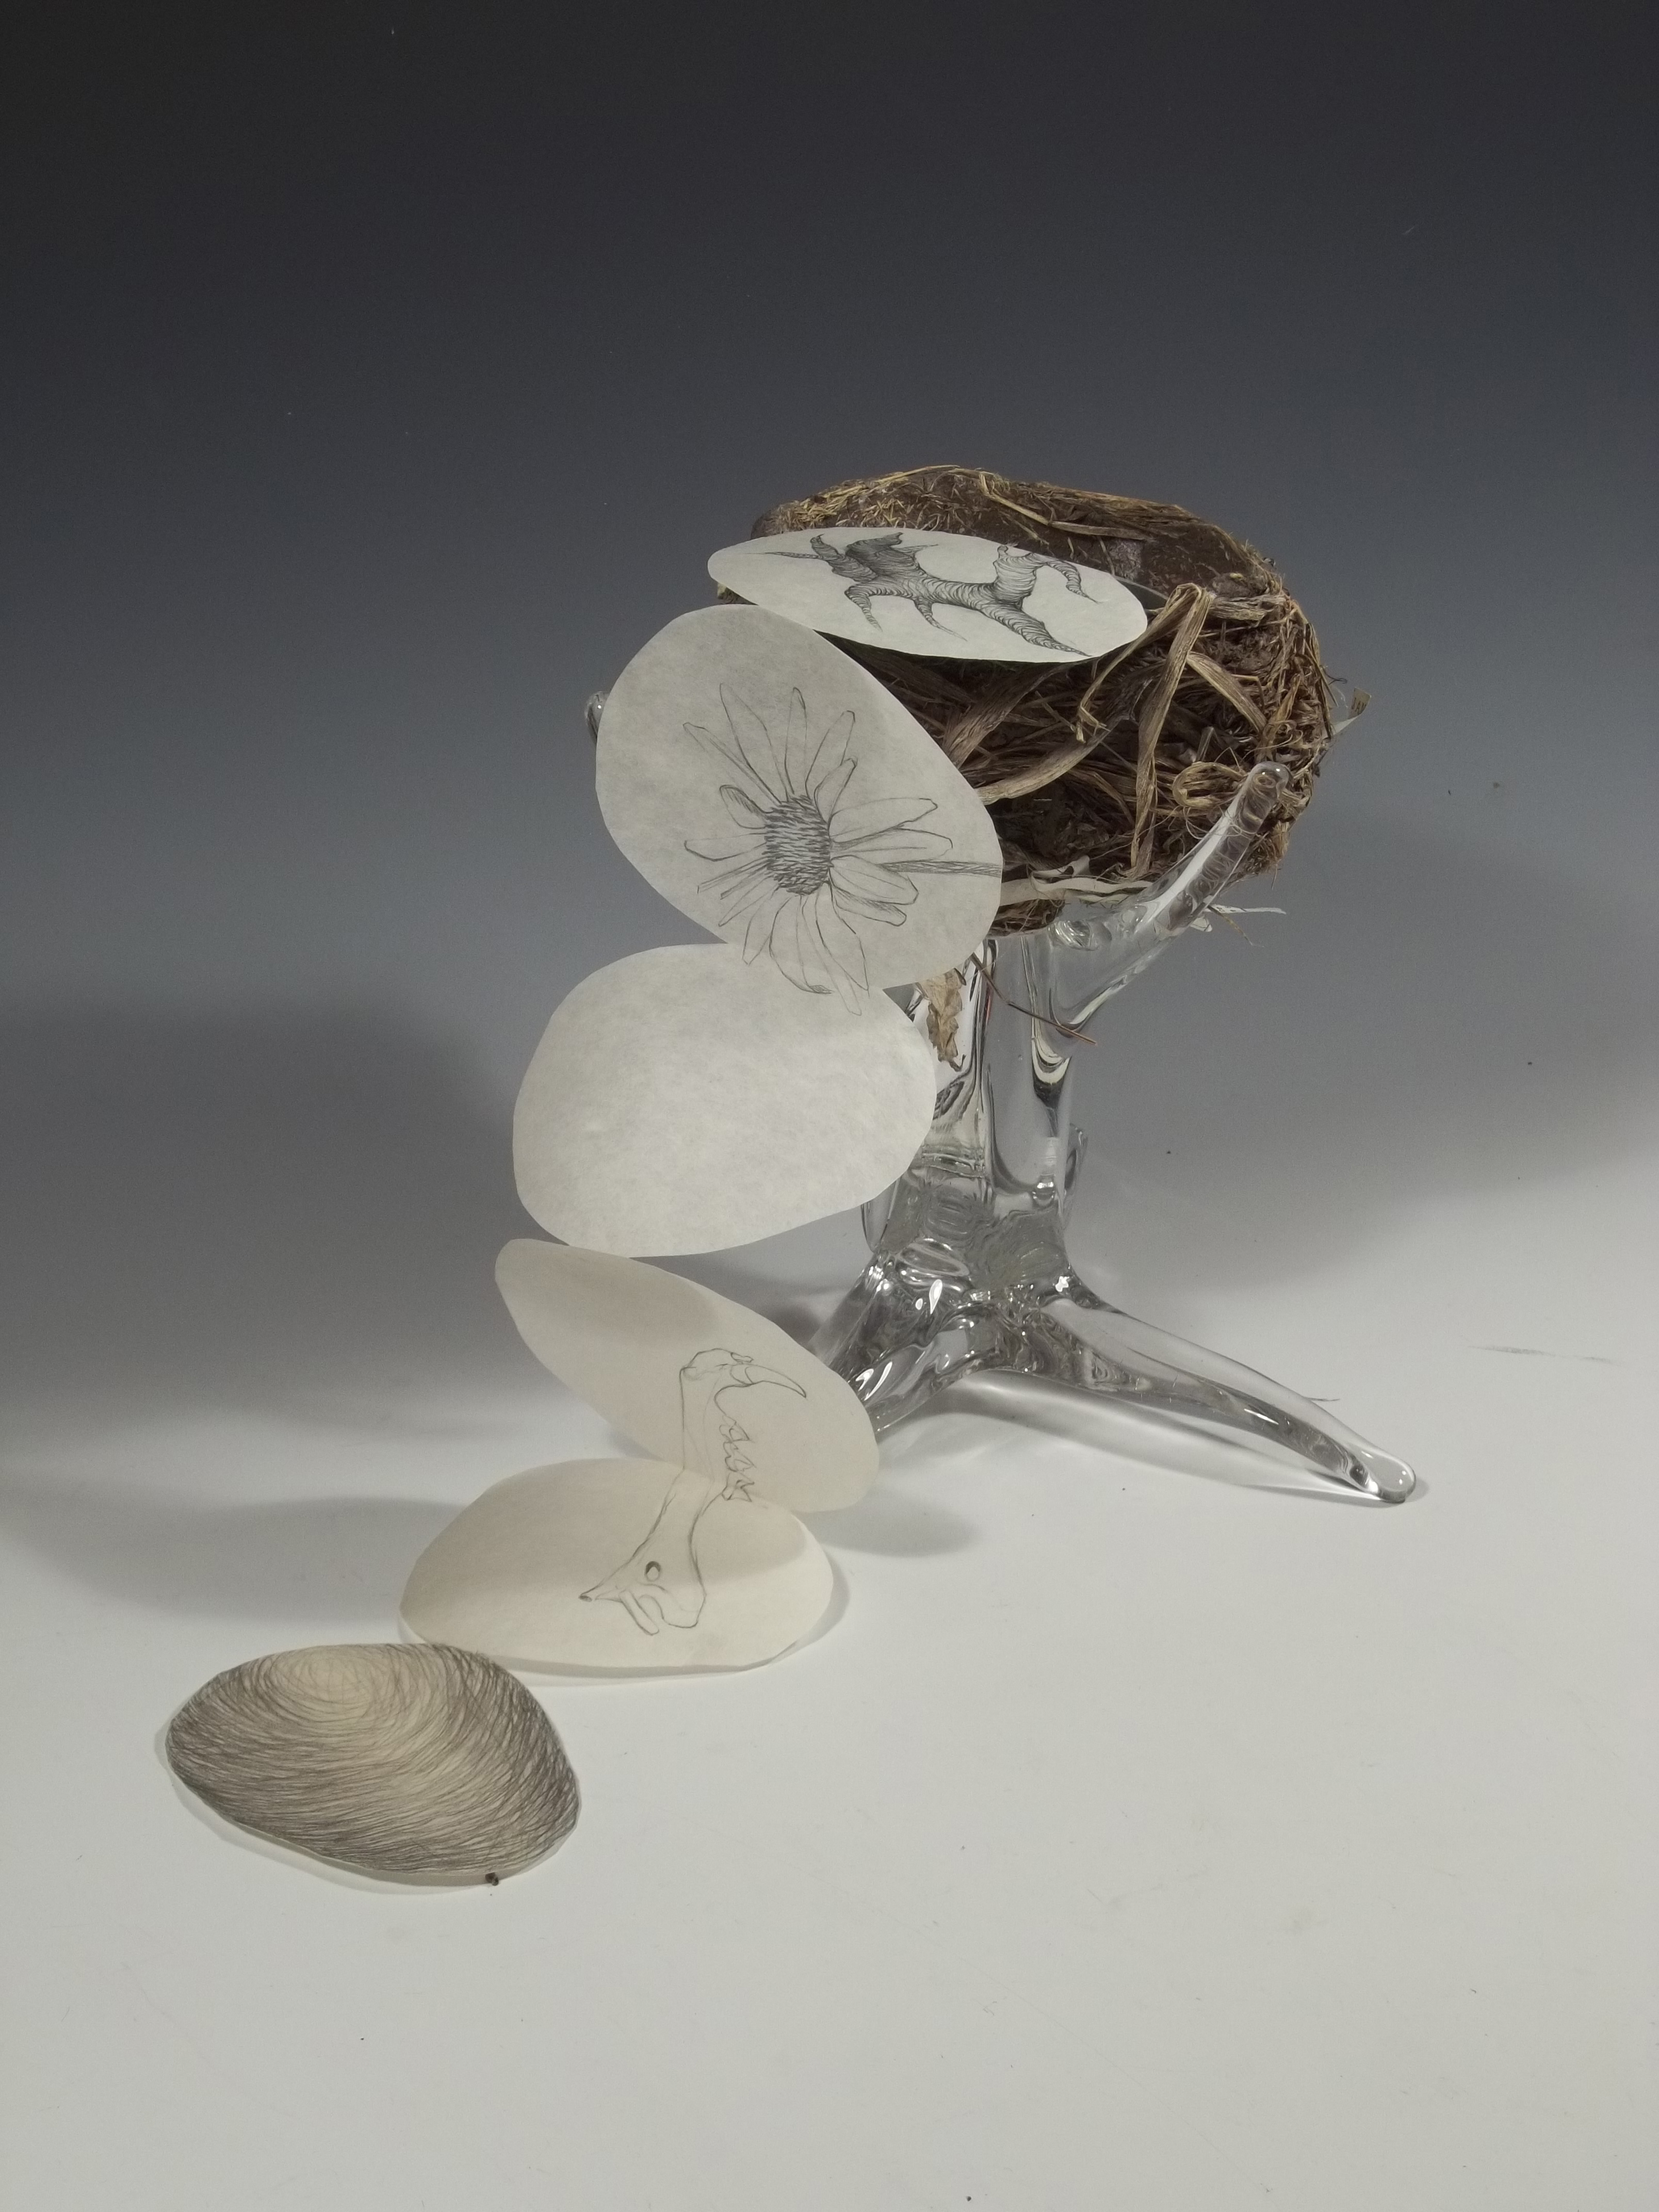 A light-weight, handmade paper accordion book flutters downward from a bird's nest in "Before We Were Born: Nest" by Andrea Peterson.  The thin pages of the book contain drawings; the bottom of the nest, a mammilian jawbone, a daisy, and a root.  A glass three-clawed stand holds the nest in its perch above a white table.